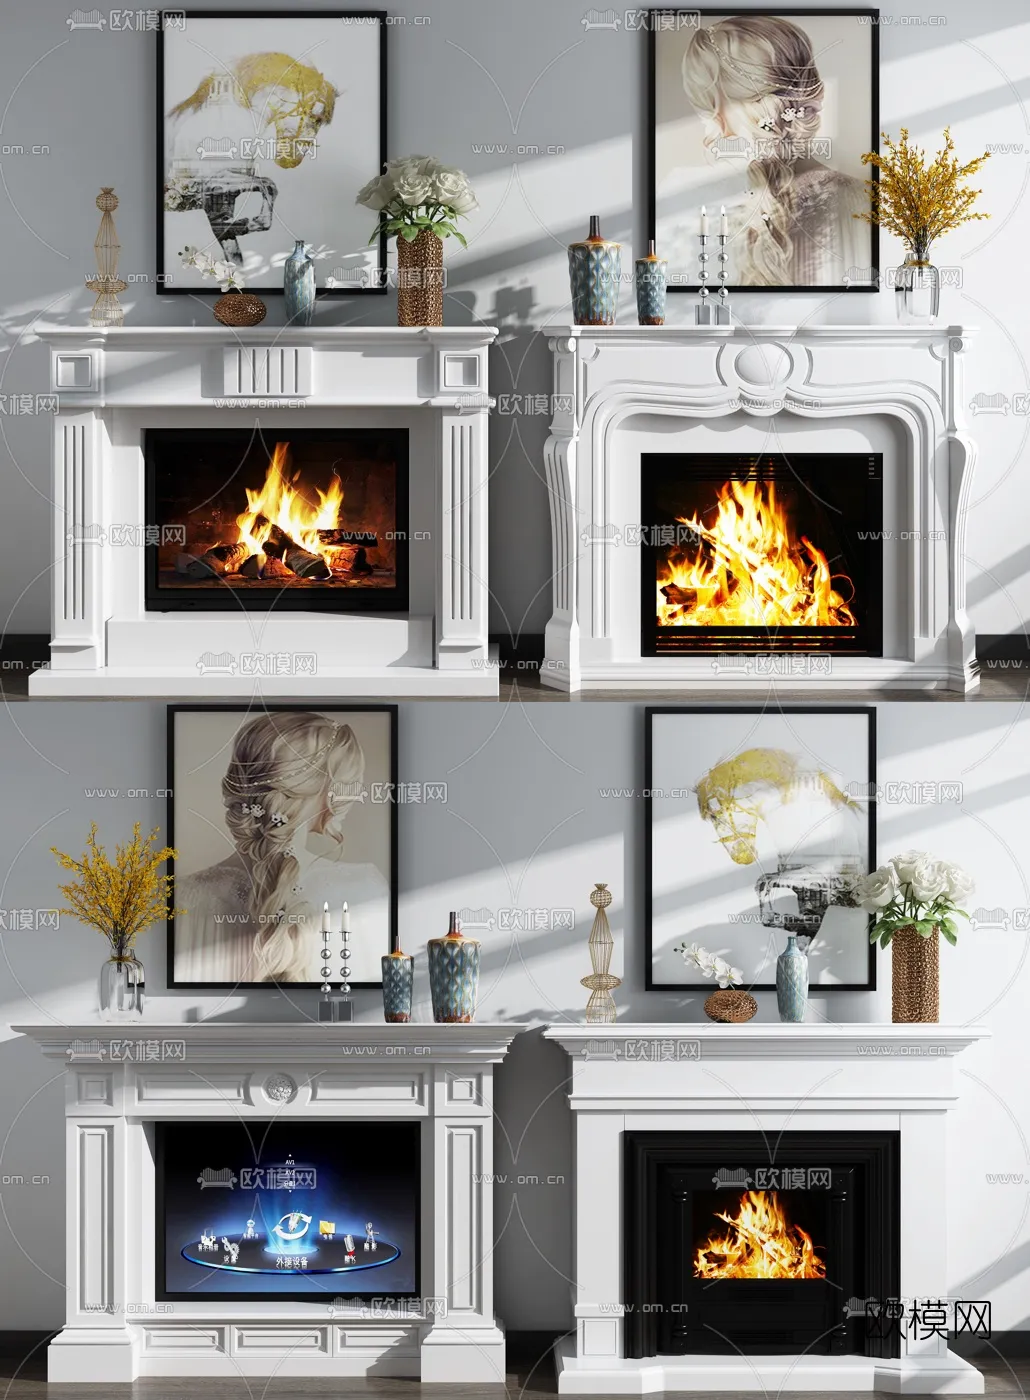 CLASSIC – FIREPLACE 3DMODELS – 036